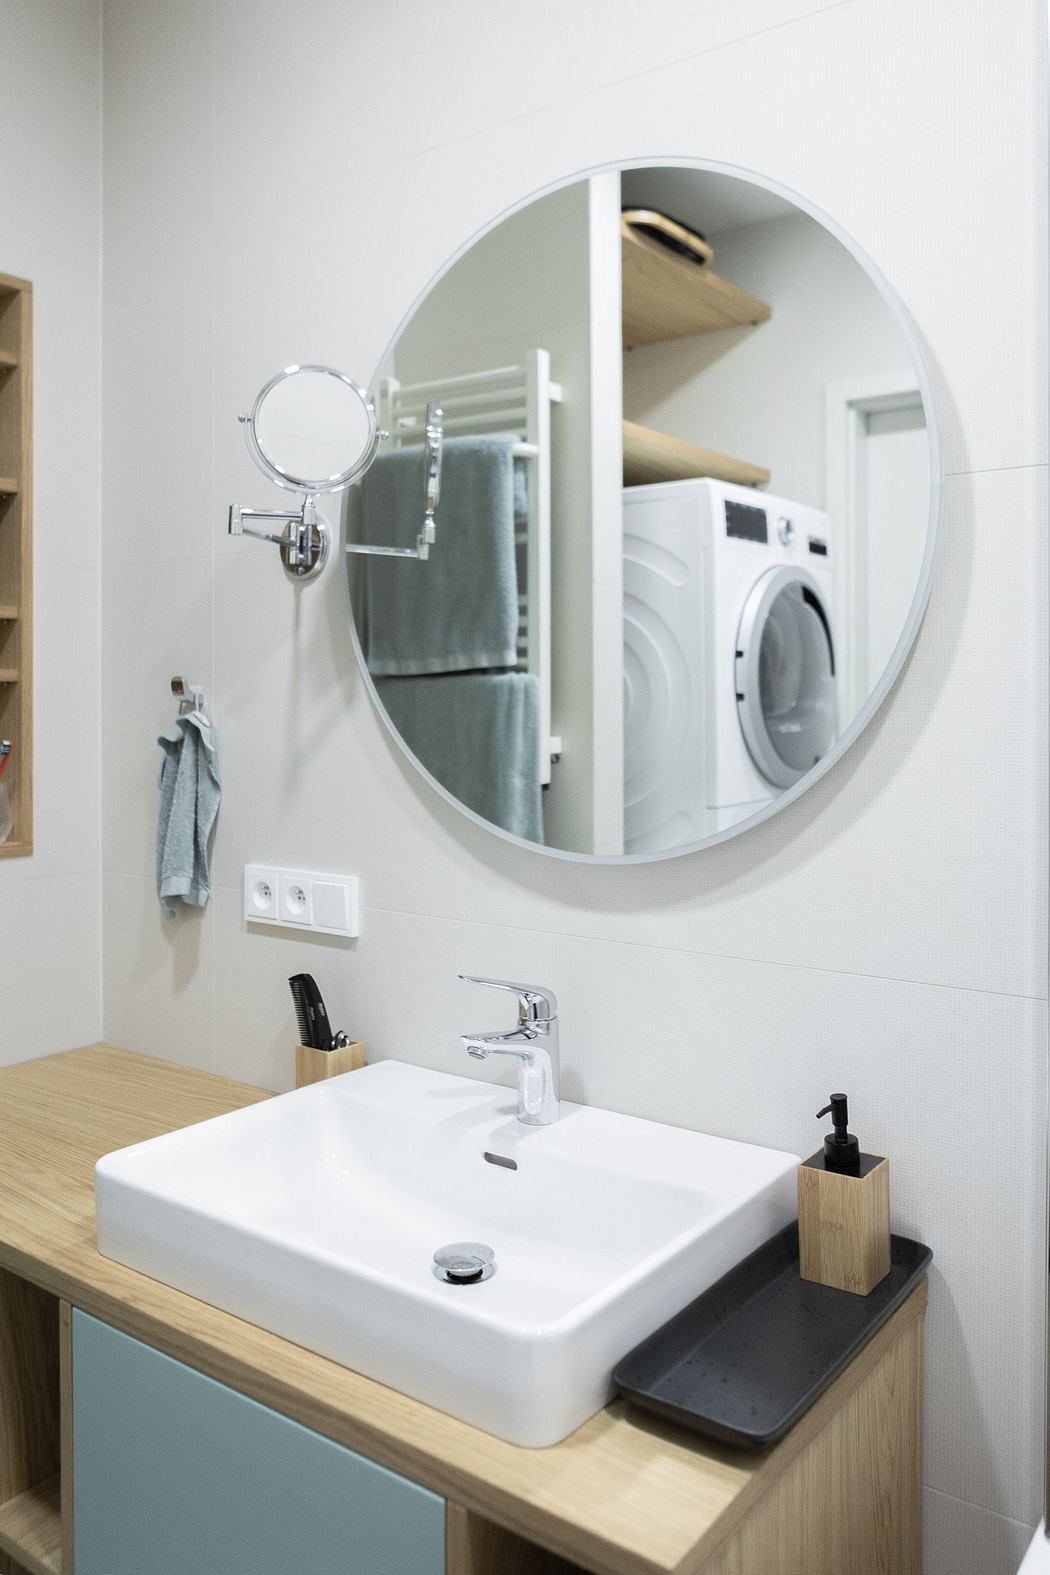 Modern bathroom with a round mirror, sink, and visible laundry area.